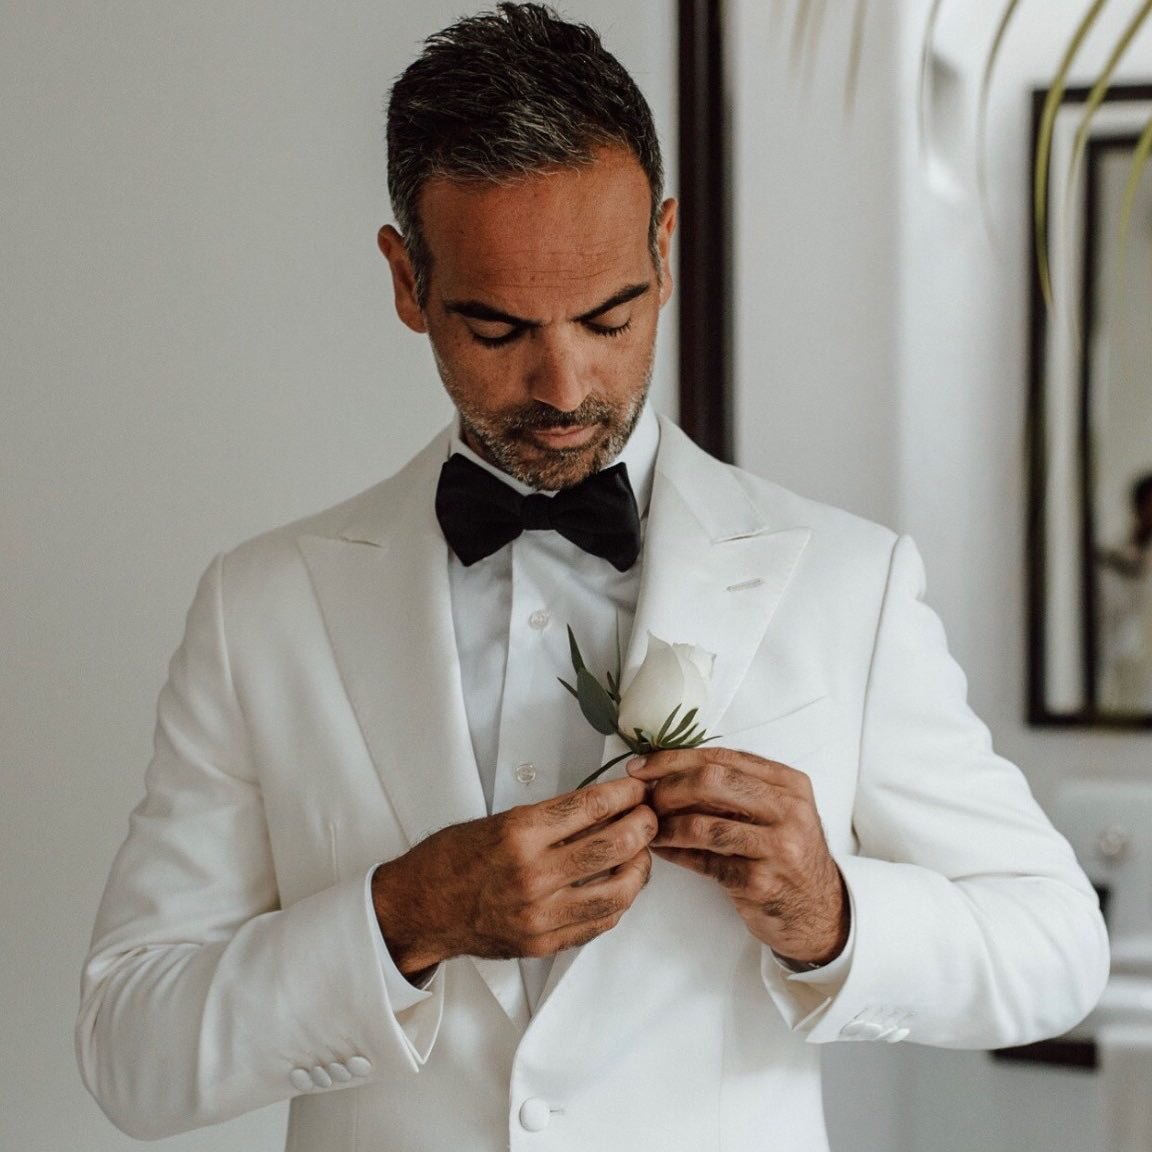 Your wedding suit isn't just a piece of clothing, it's a symbol of your commitment and dedication to your partner. It's a reflection of your personal style, and a representation of the love you share. So make sure to choose wisely, and wear it with p